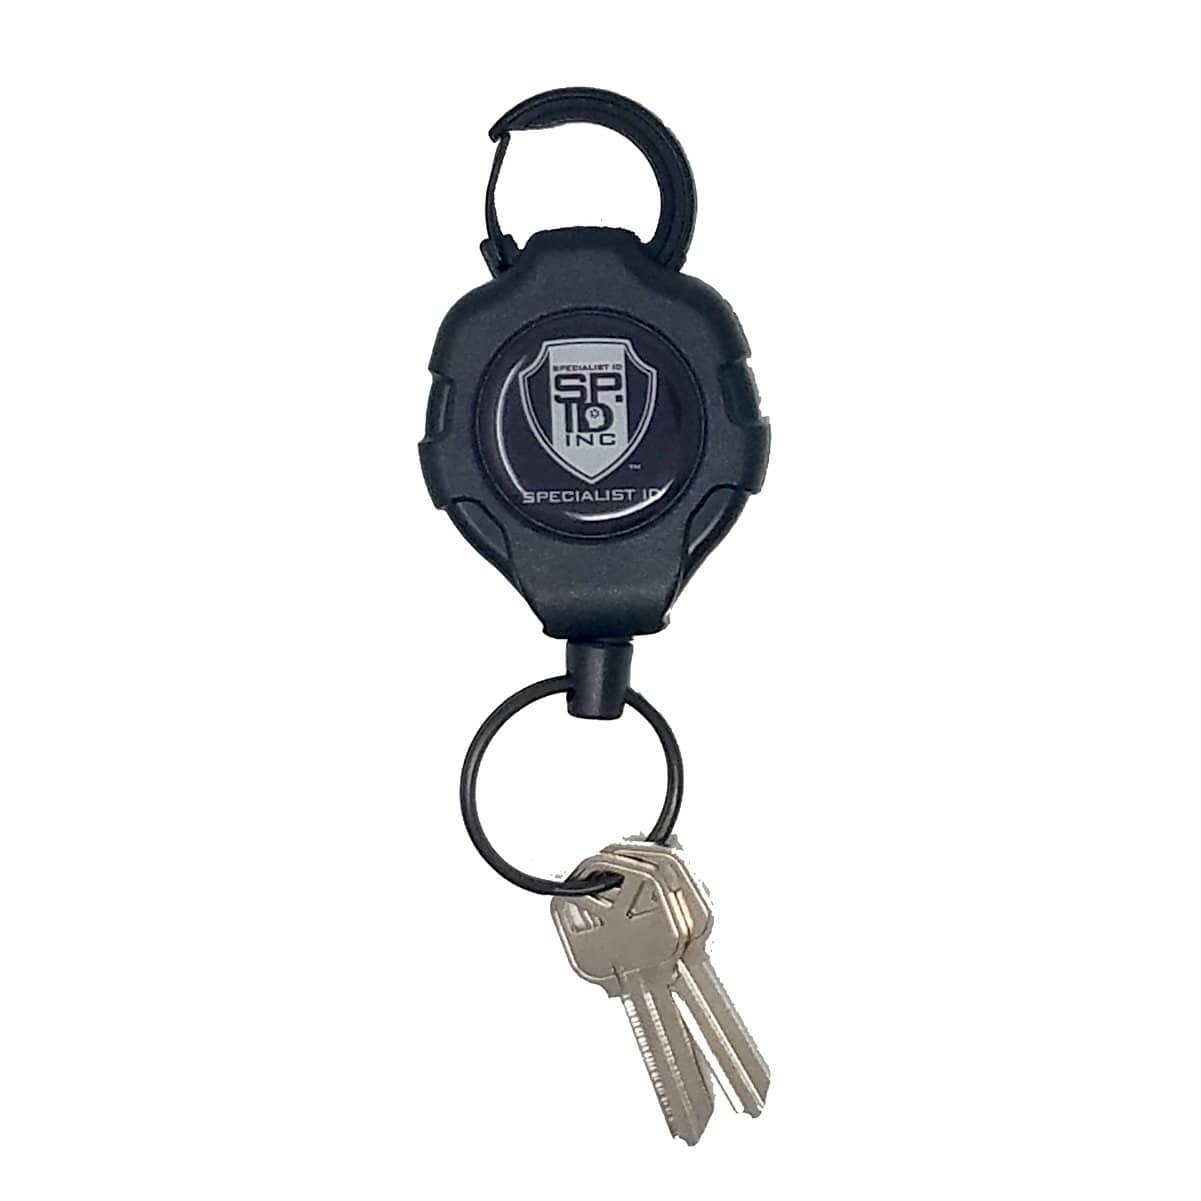 Heavy Duty Retractable Ratchit Keychain Tether Reel for Multiple Keys with Clip and Locking Feature